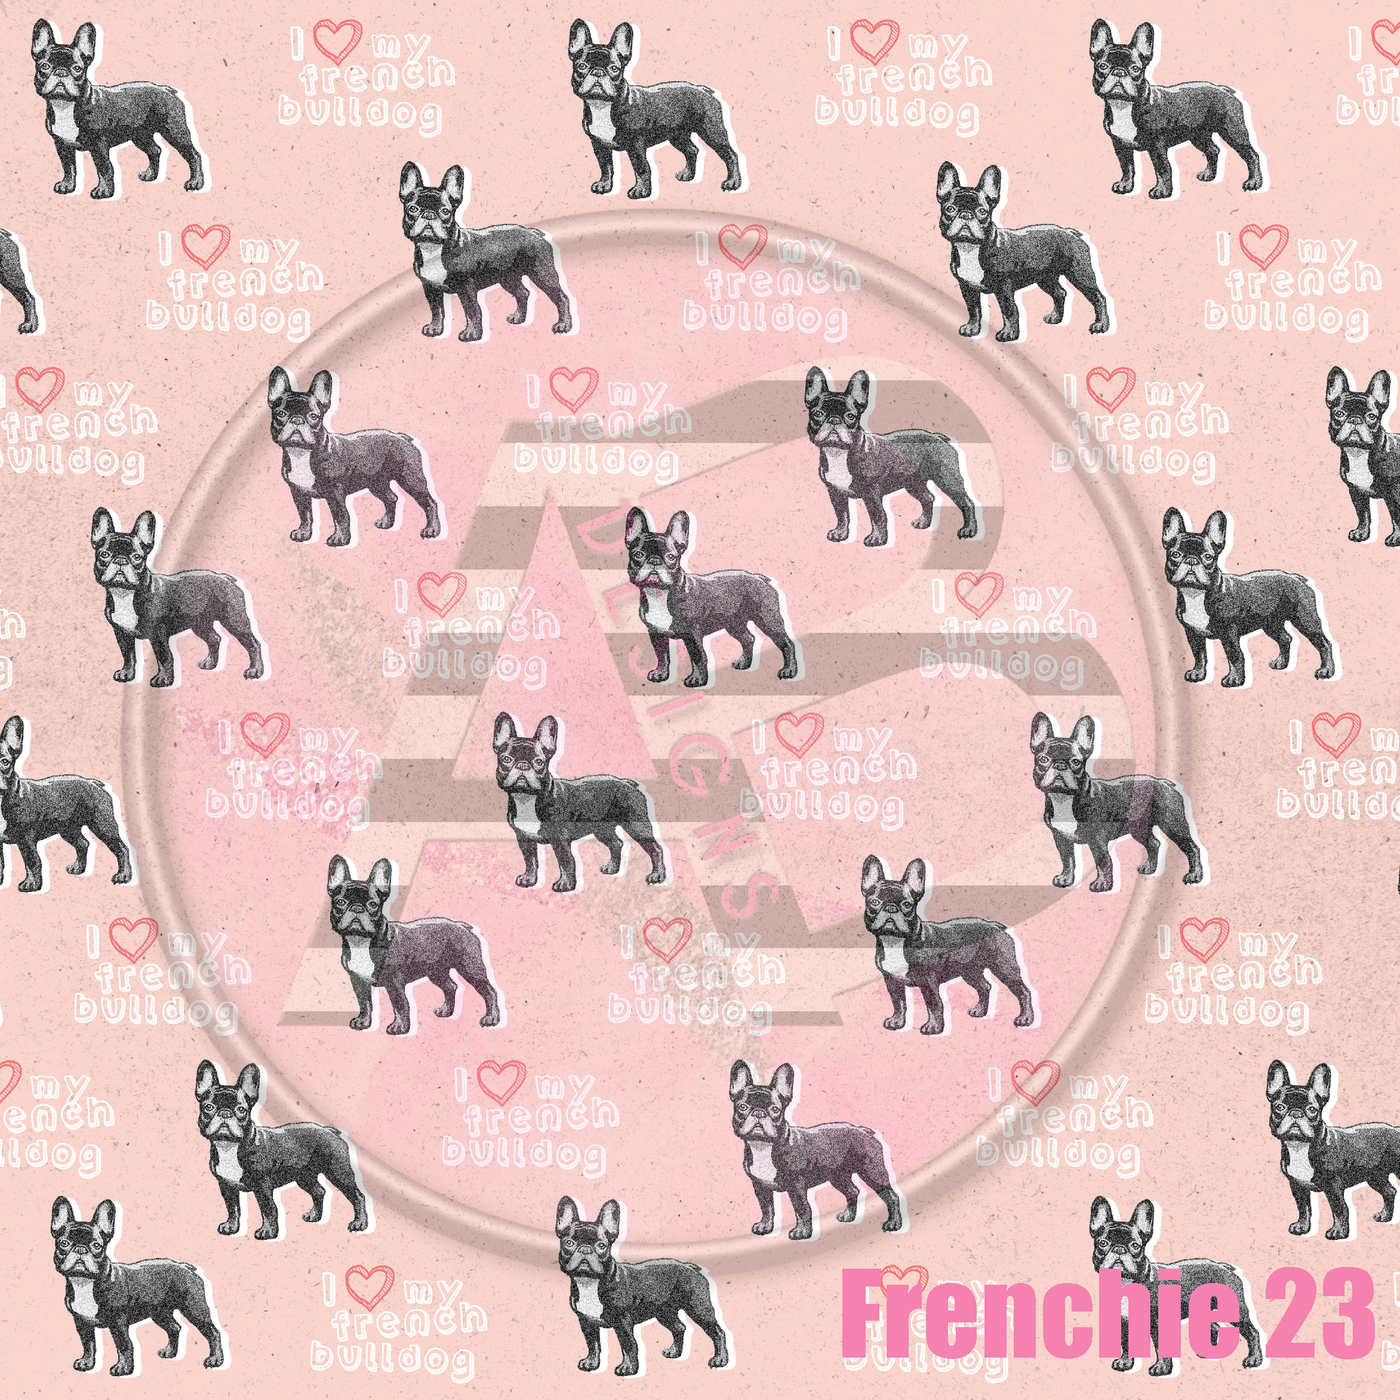 Adhesive Patterned Vinyl - Frenchie 23